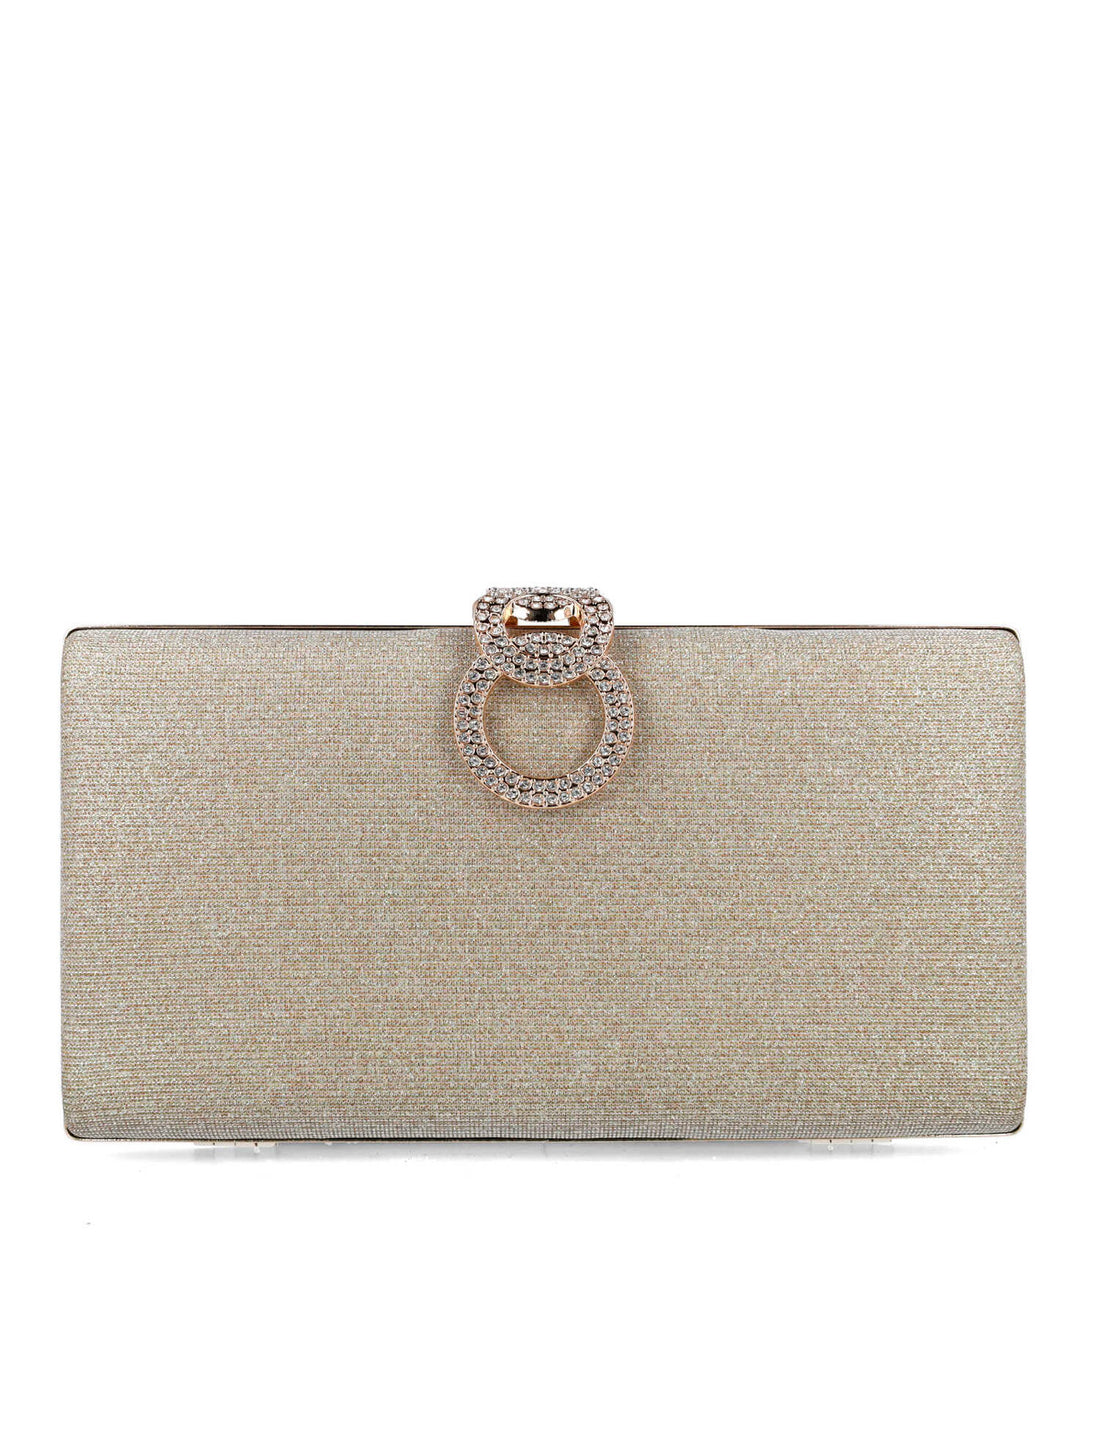 Shimmery Clutch With Embellished Hardware_85479_00_01